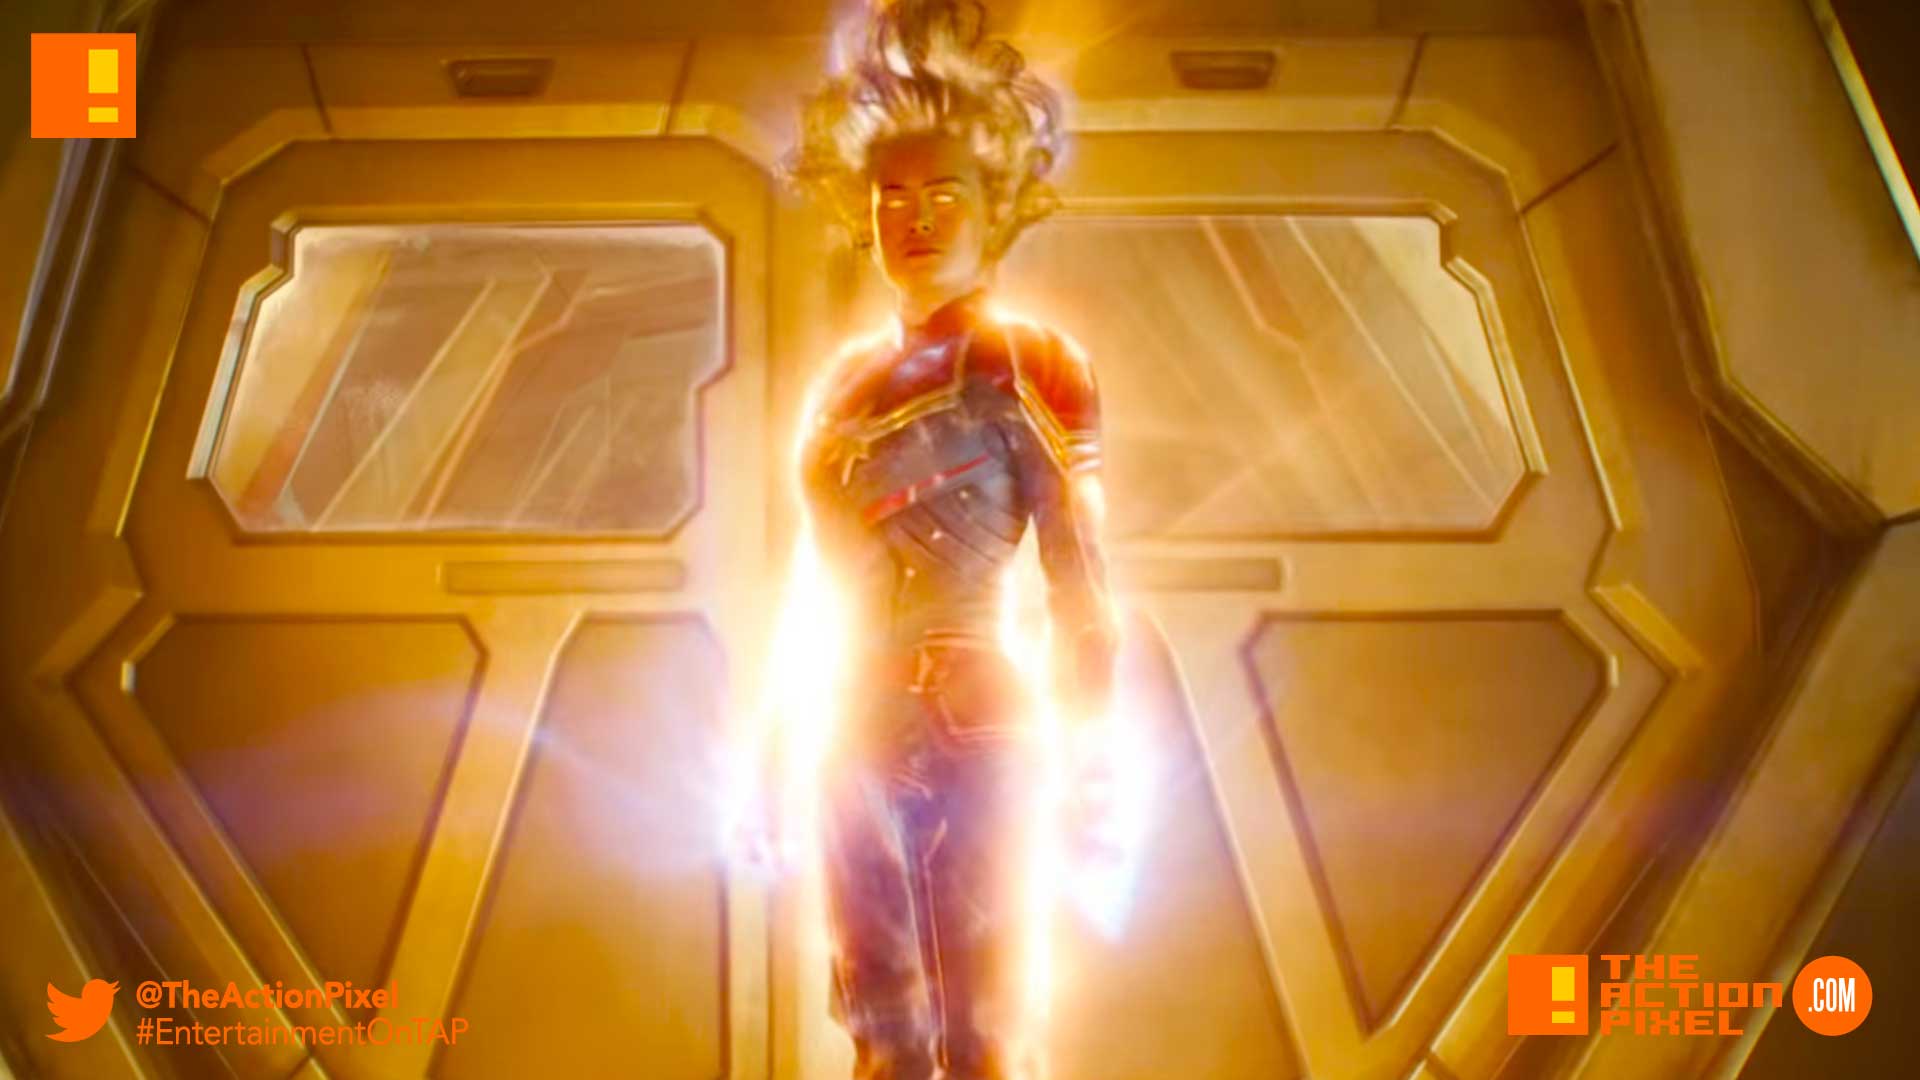 trailer 2, captain marvel, brie larson, marvel,marvel comics,marvel entertainment, the action pixel,entertainment on tap, annette Bening, actor, captain marvel, brie larson, marvel,marvel comics,marvel entertainment, the action pixel,entertainment on tap, first look, entertainment weekly, skrull, mar-vell, jude law, nick fury, poster, new trailer, espn,